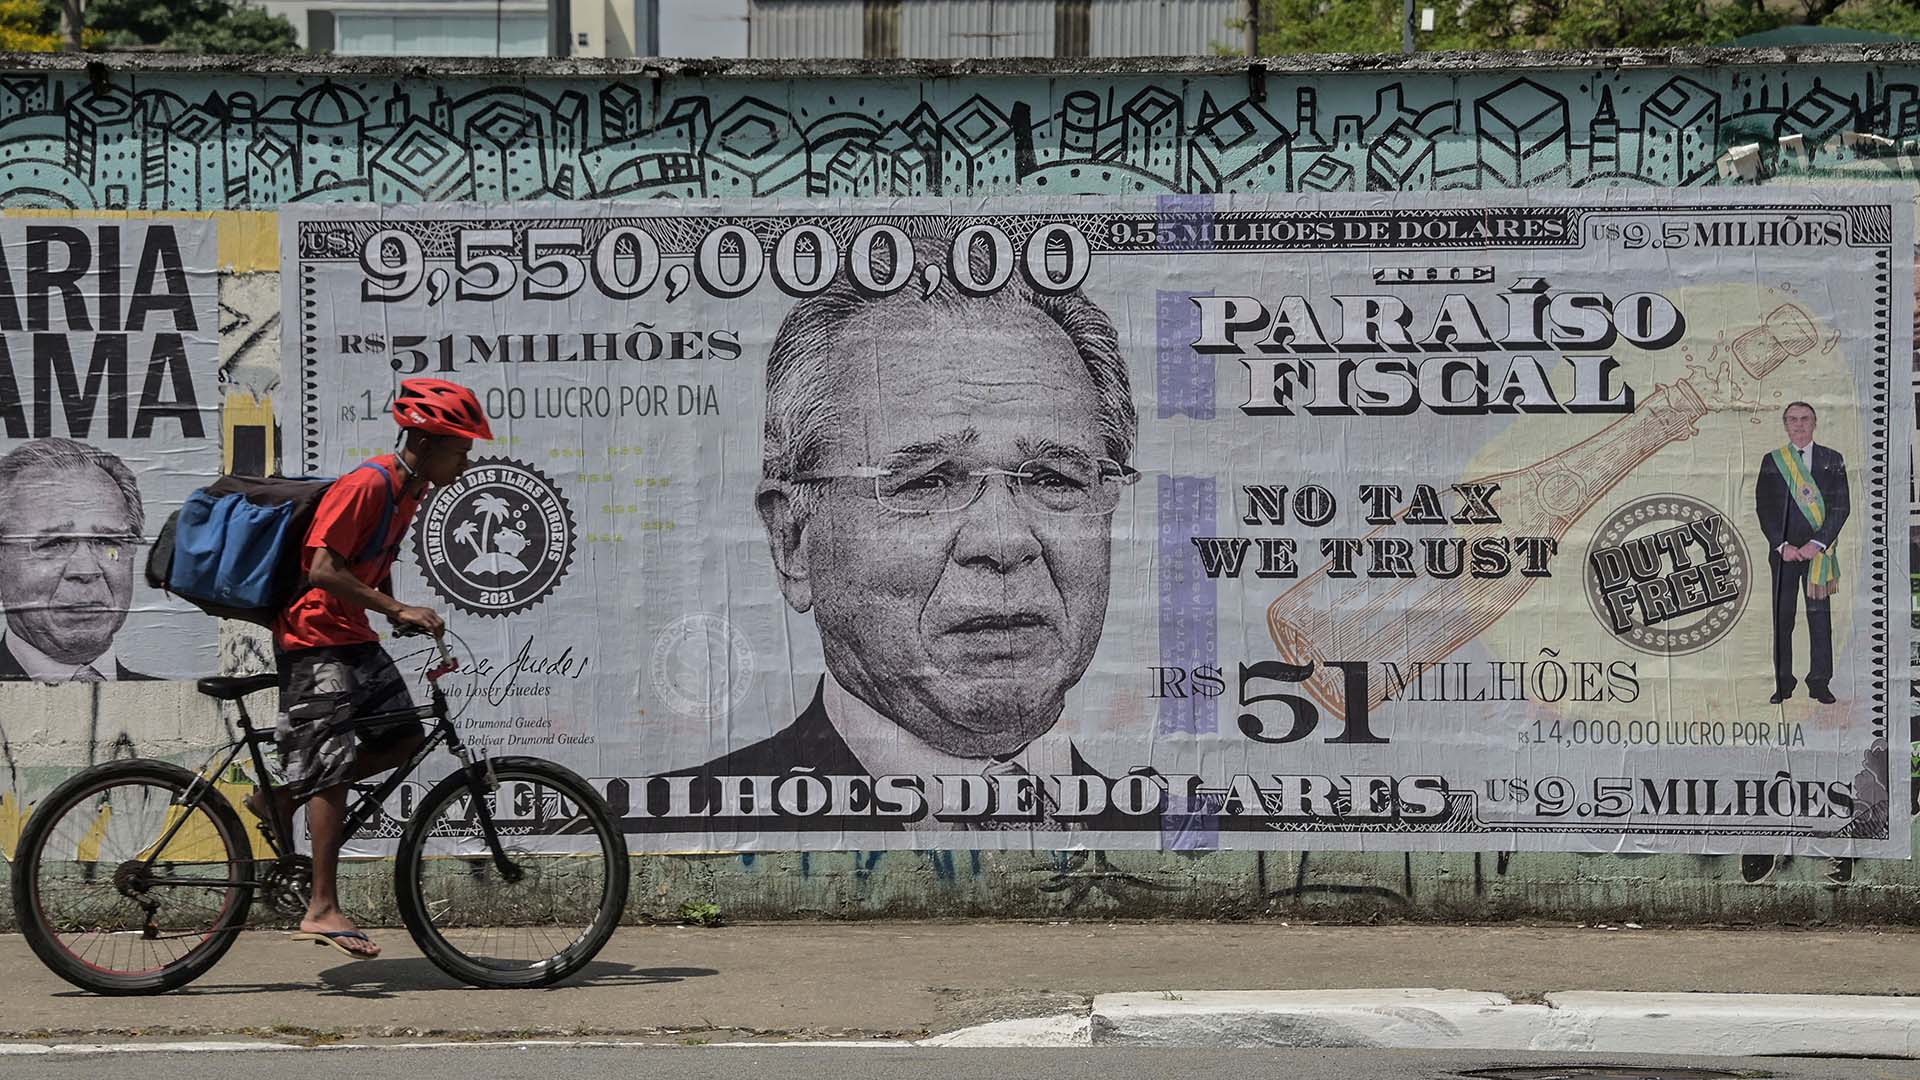 A man rides his bike past a poster depicting Brazil's Economy Minister Paulo Guede.